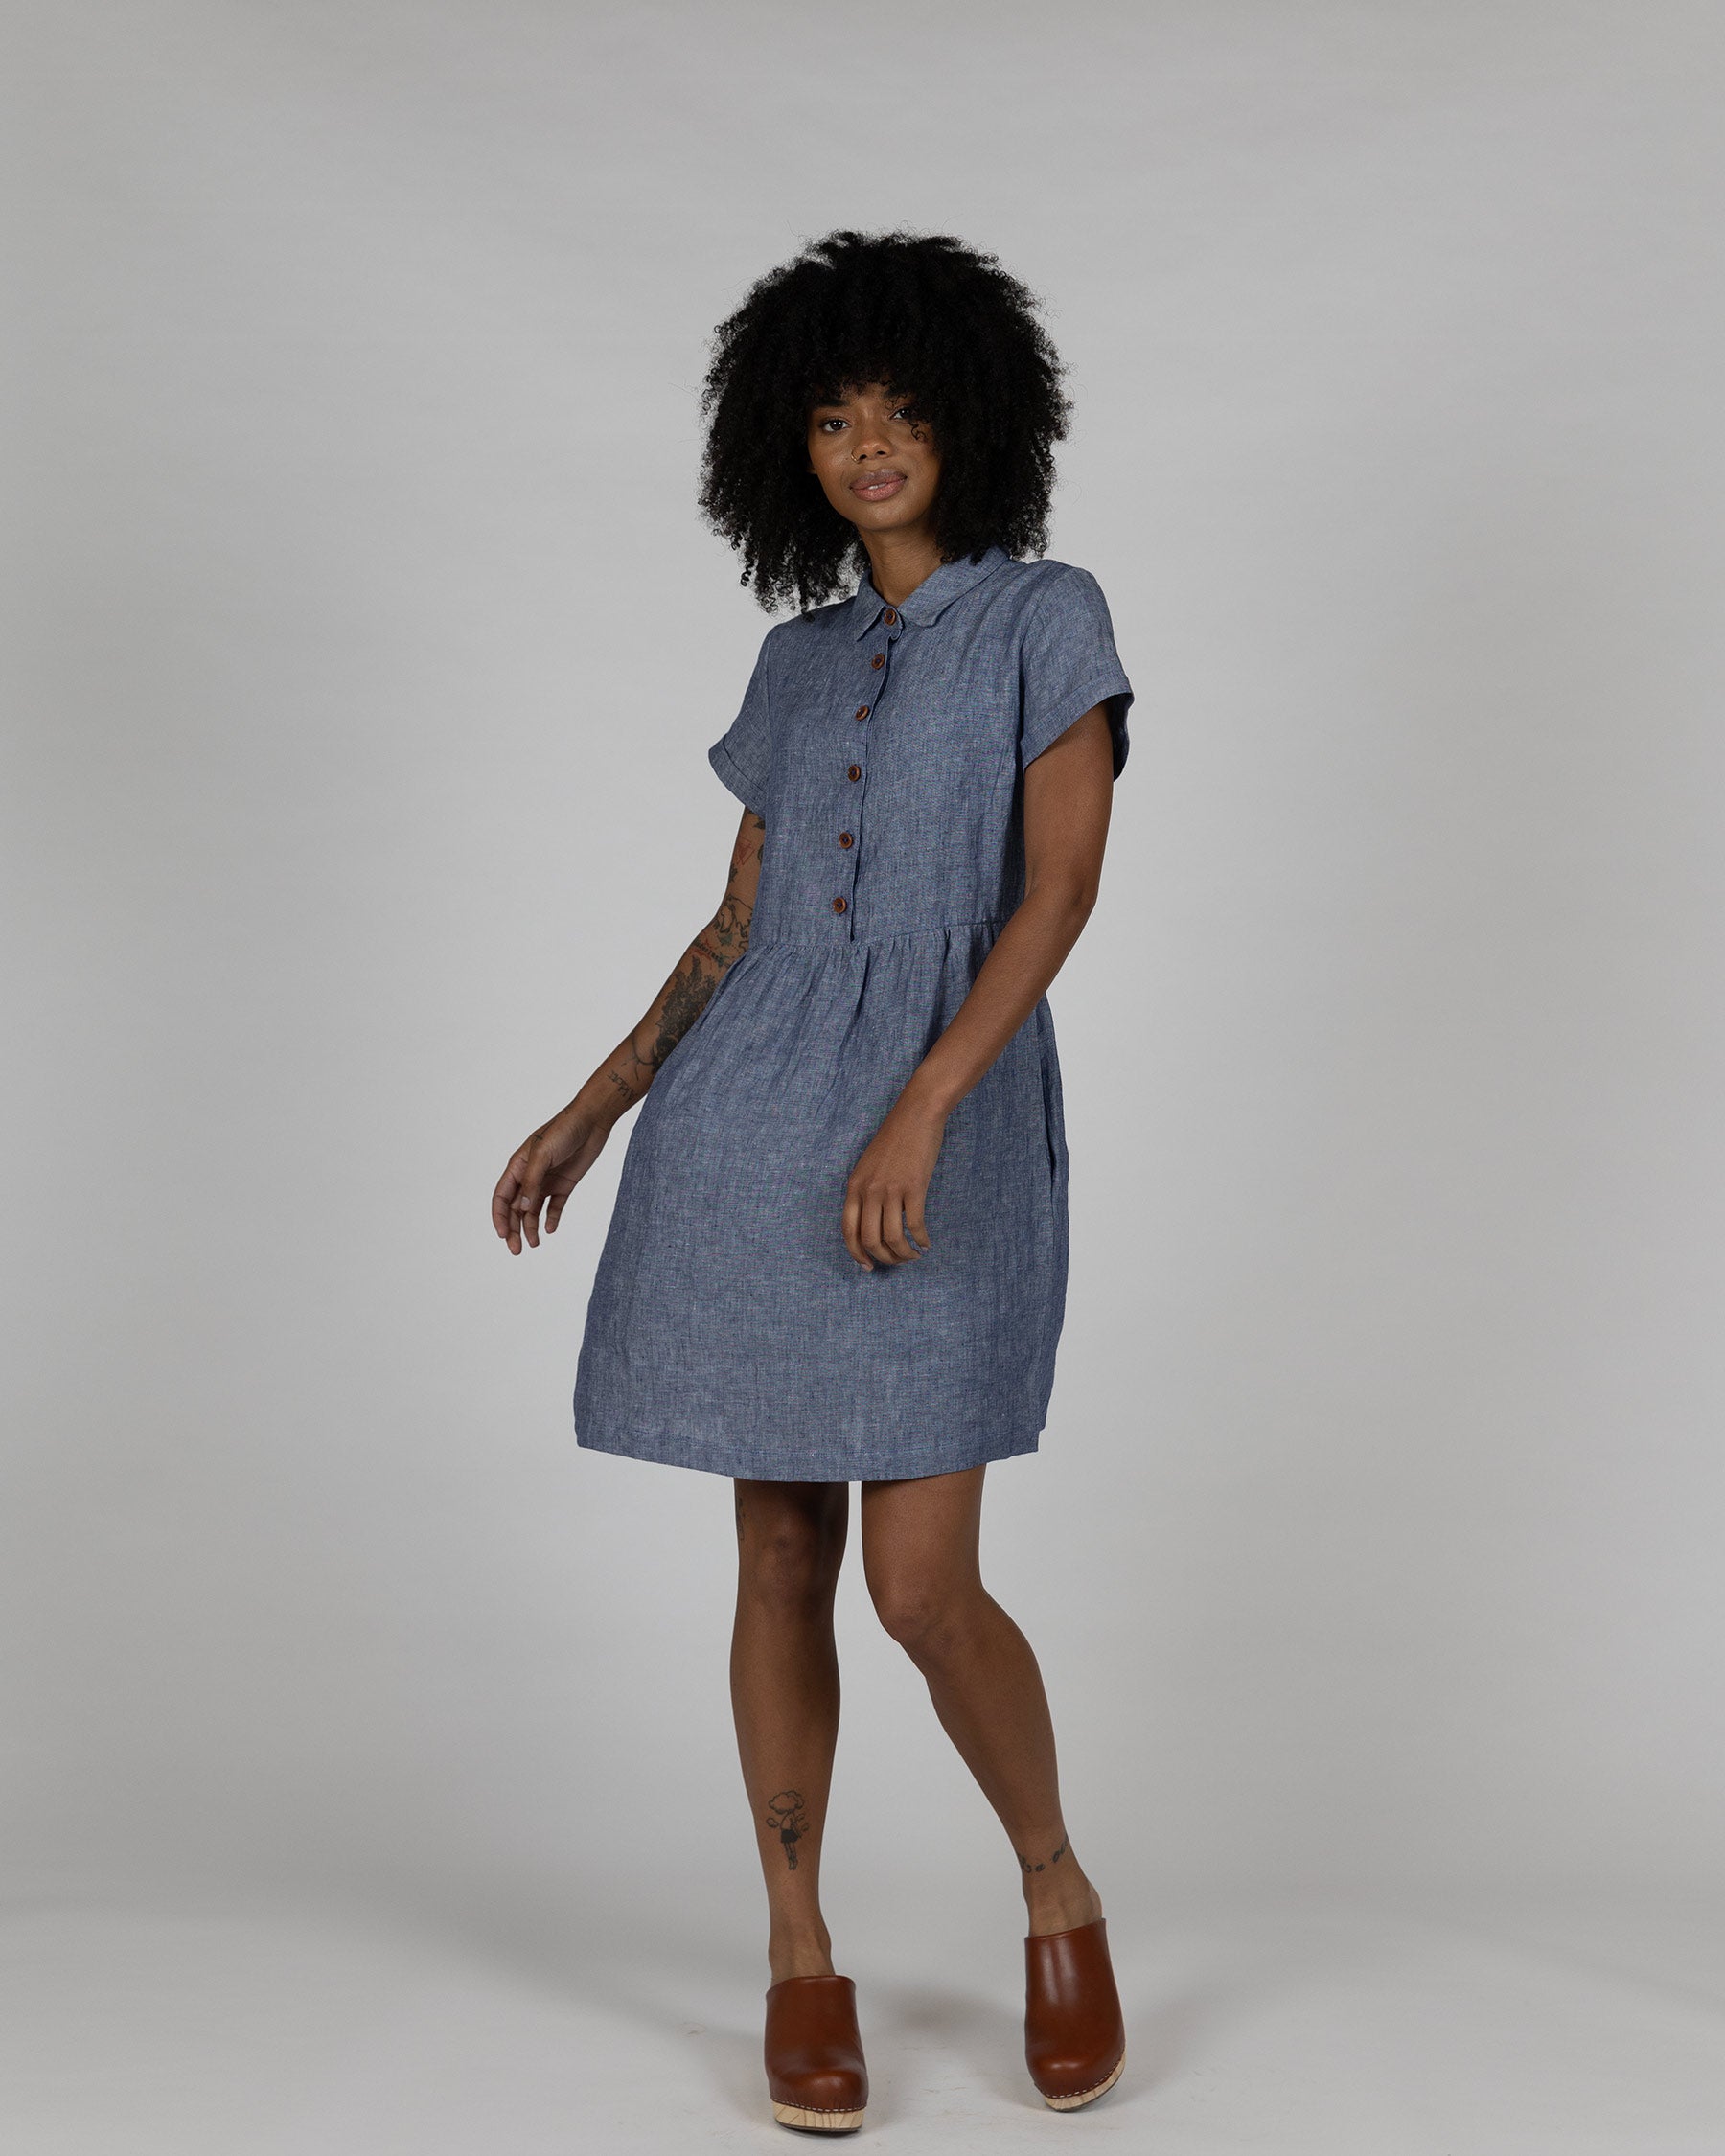 Model No.23 Collared, Button up Linen Dress in Oxford Chambray